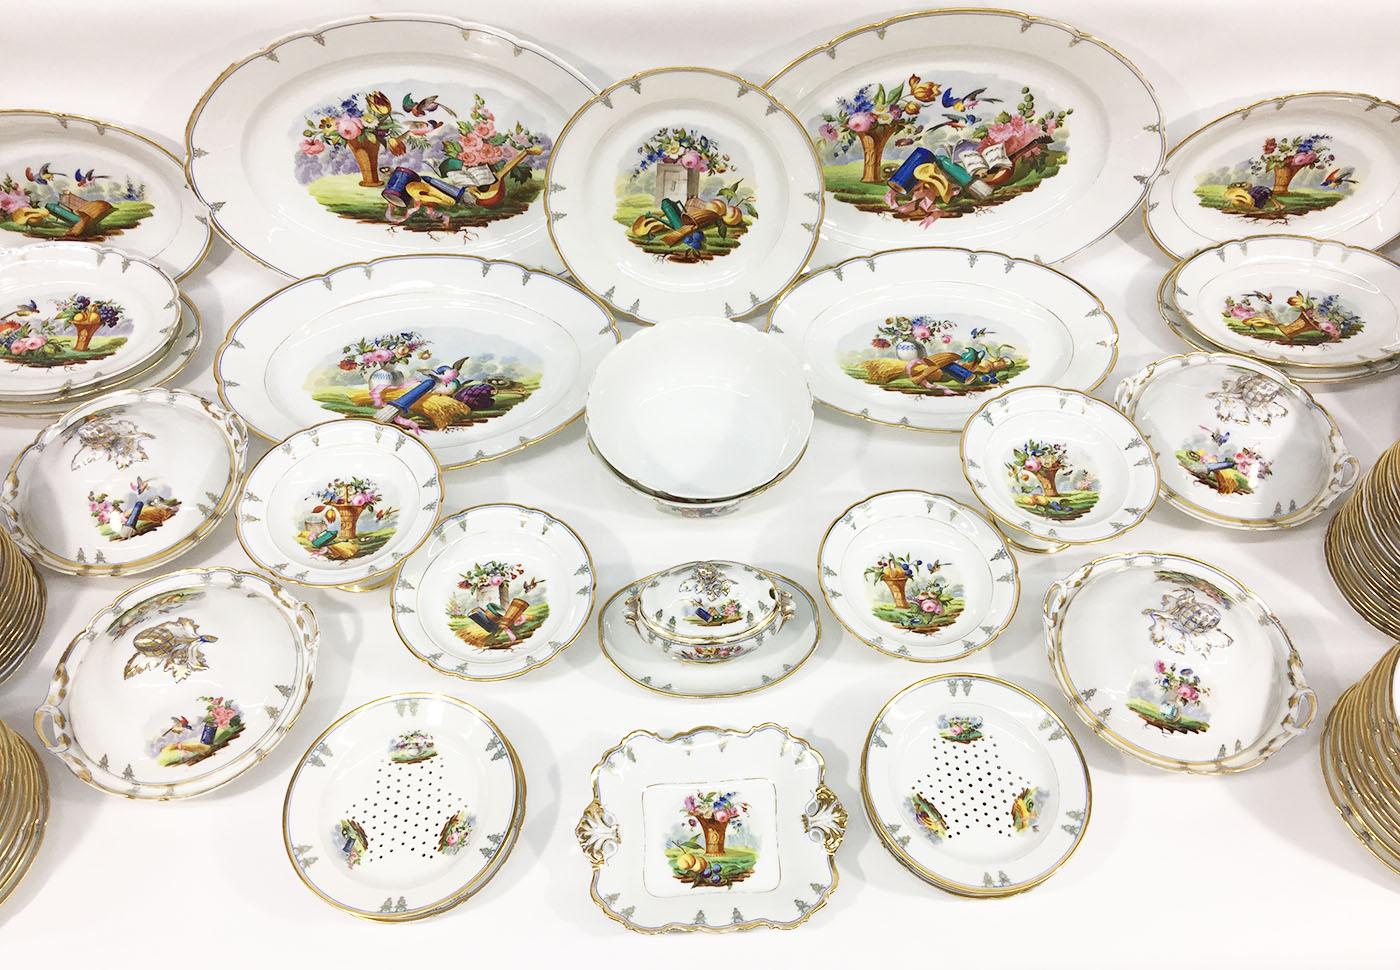 “Old Paris” porcelain dinner service

188 pieces tableware (200 parts) 

19th century French porcelain. 
Beautiful white porcelain with blue and gold painted border and in the center several decorations of flowers in a vase, different kinds of